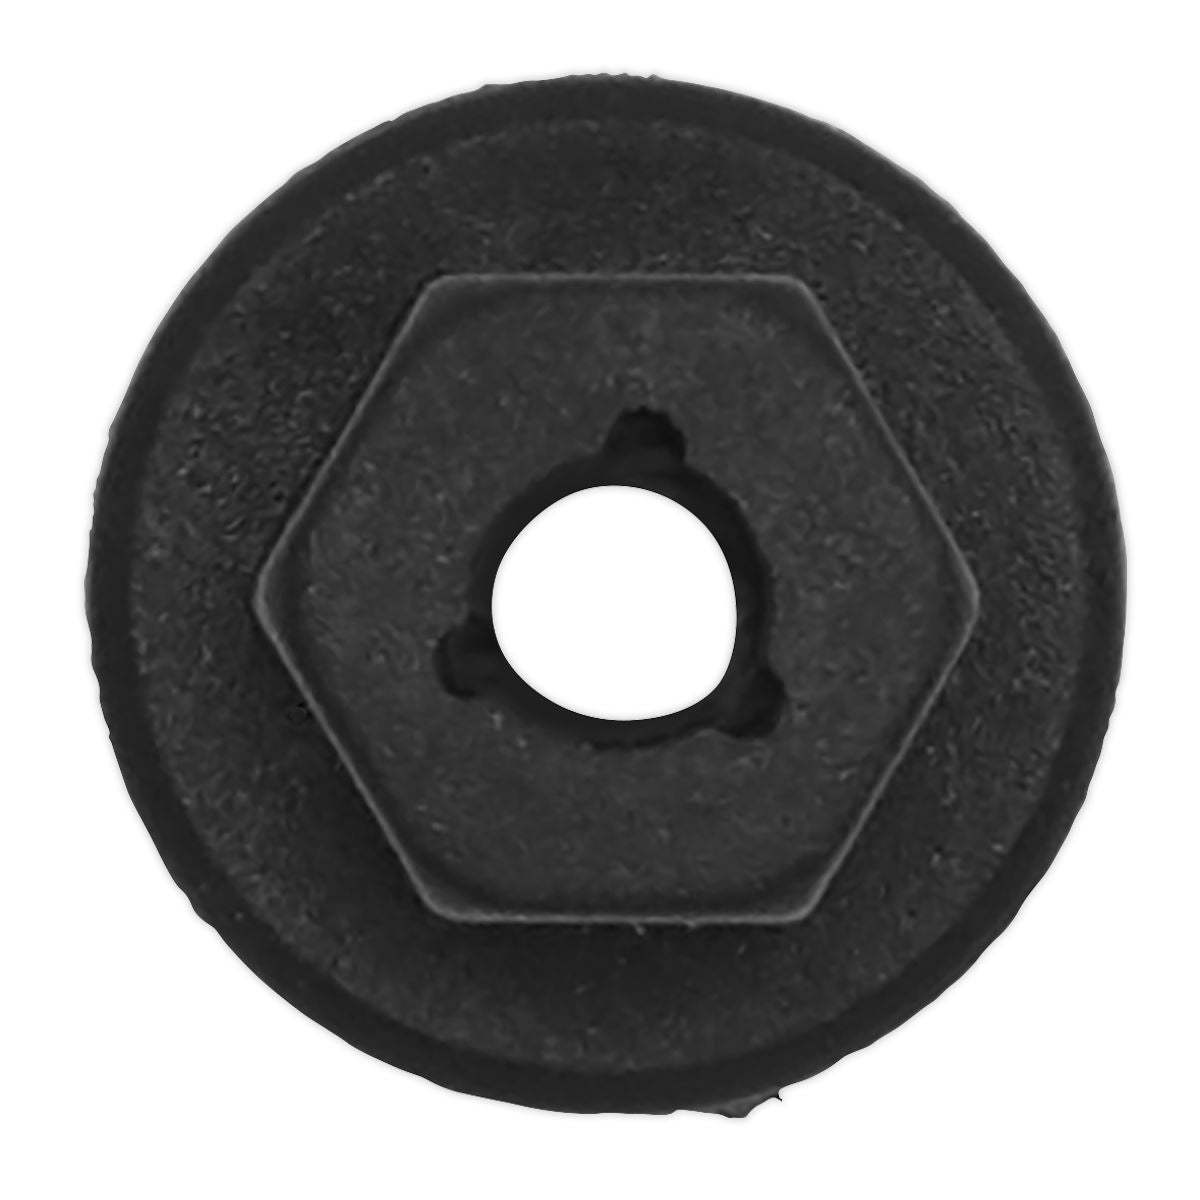 Sealey Locking Nut, Ø16mm x 10mm, Ford, GM - Pack of 20